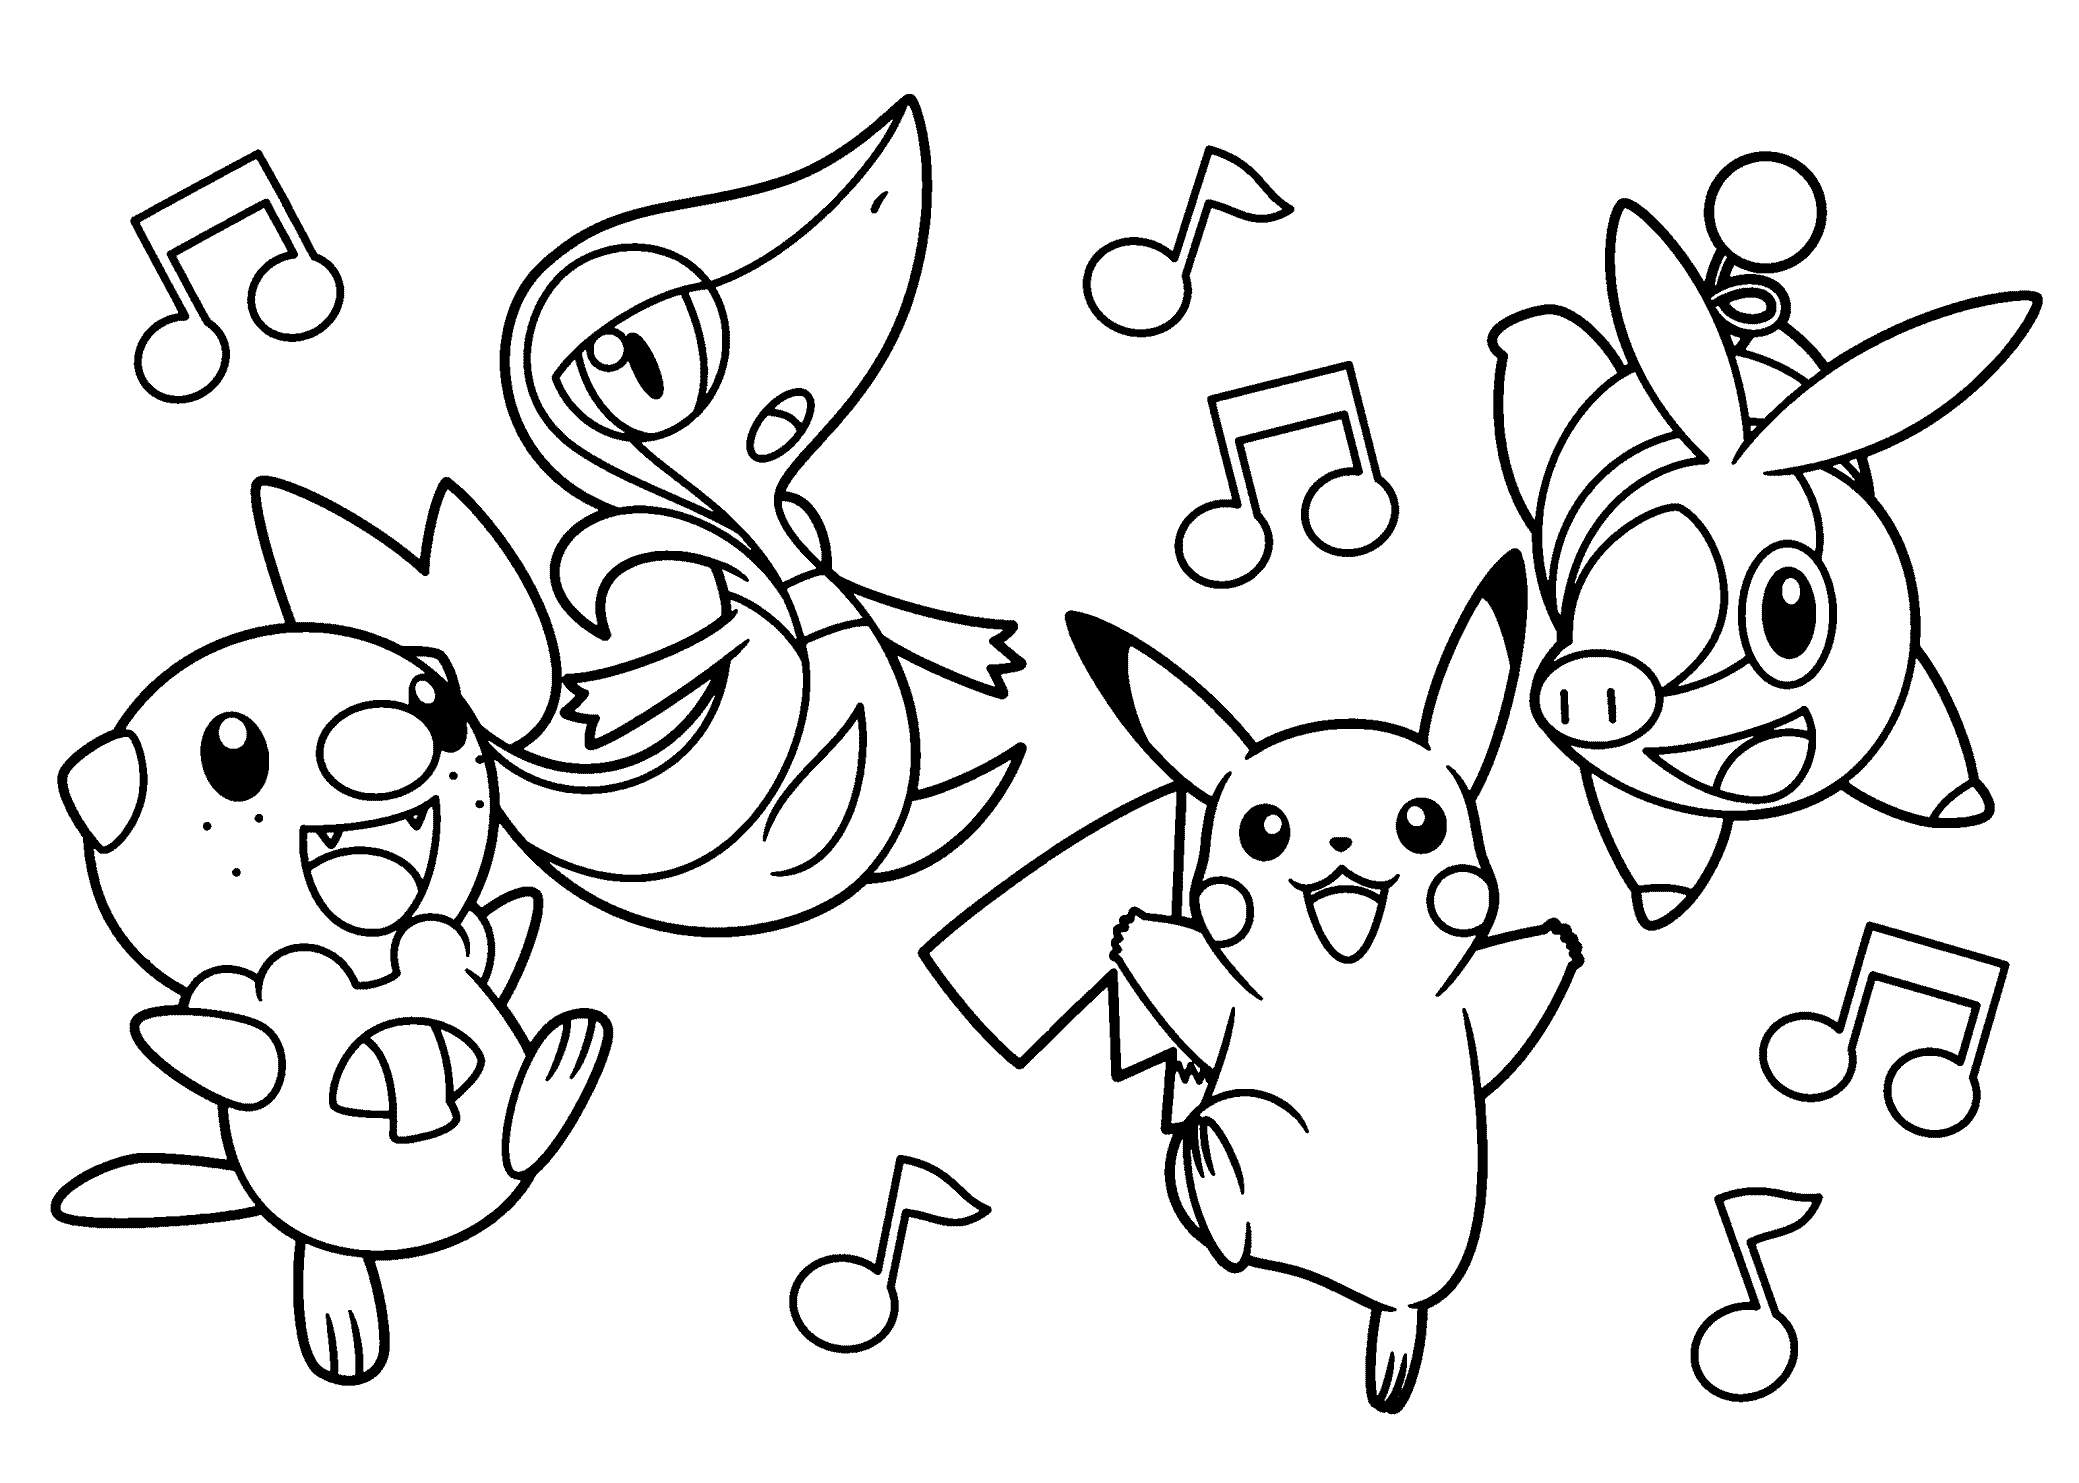 Free Pokemon Coloring Pages Black And White Pokemon Piplup ...